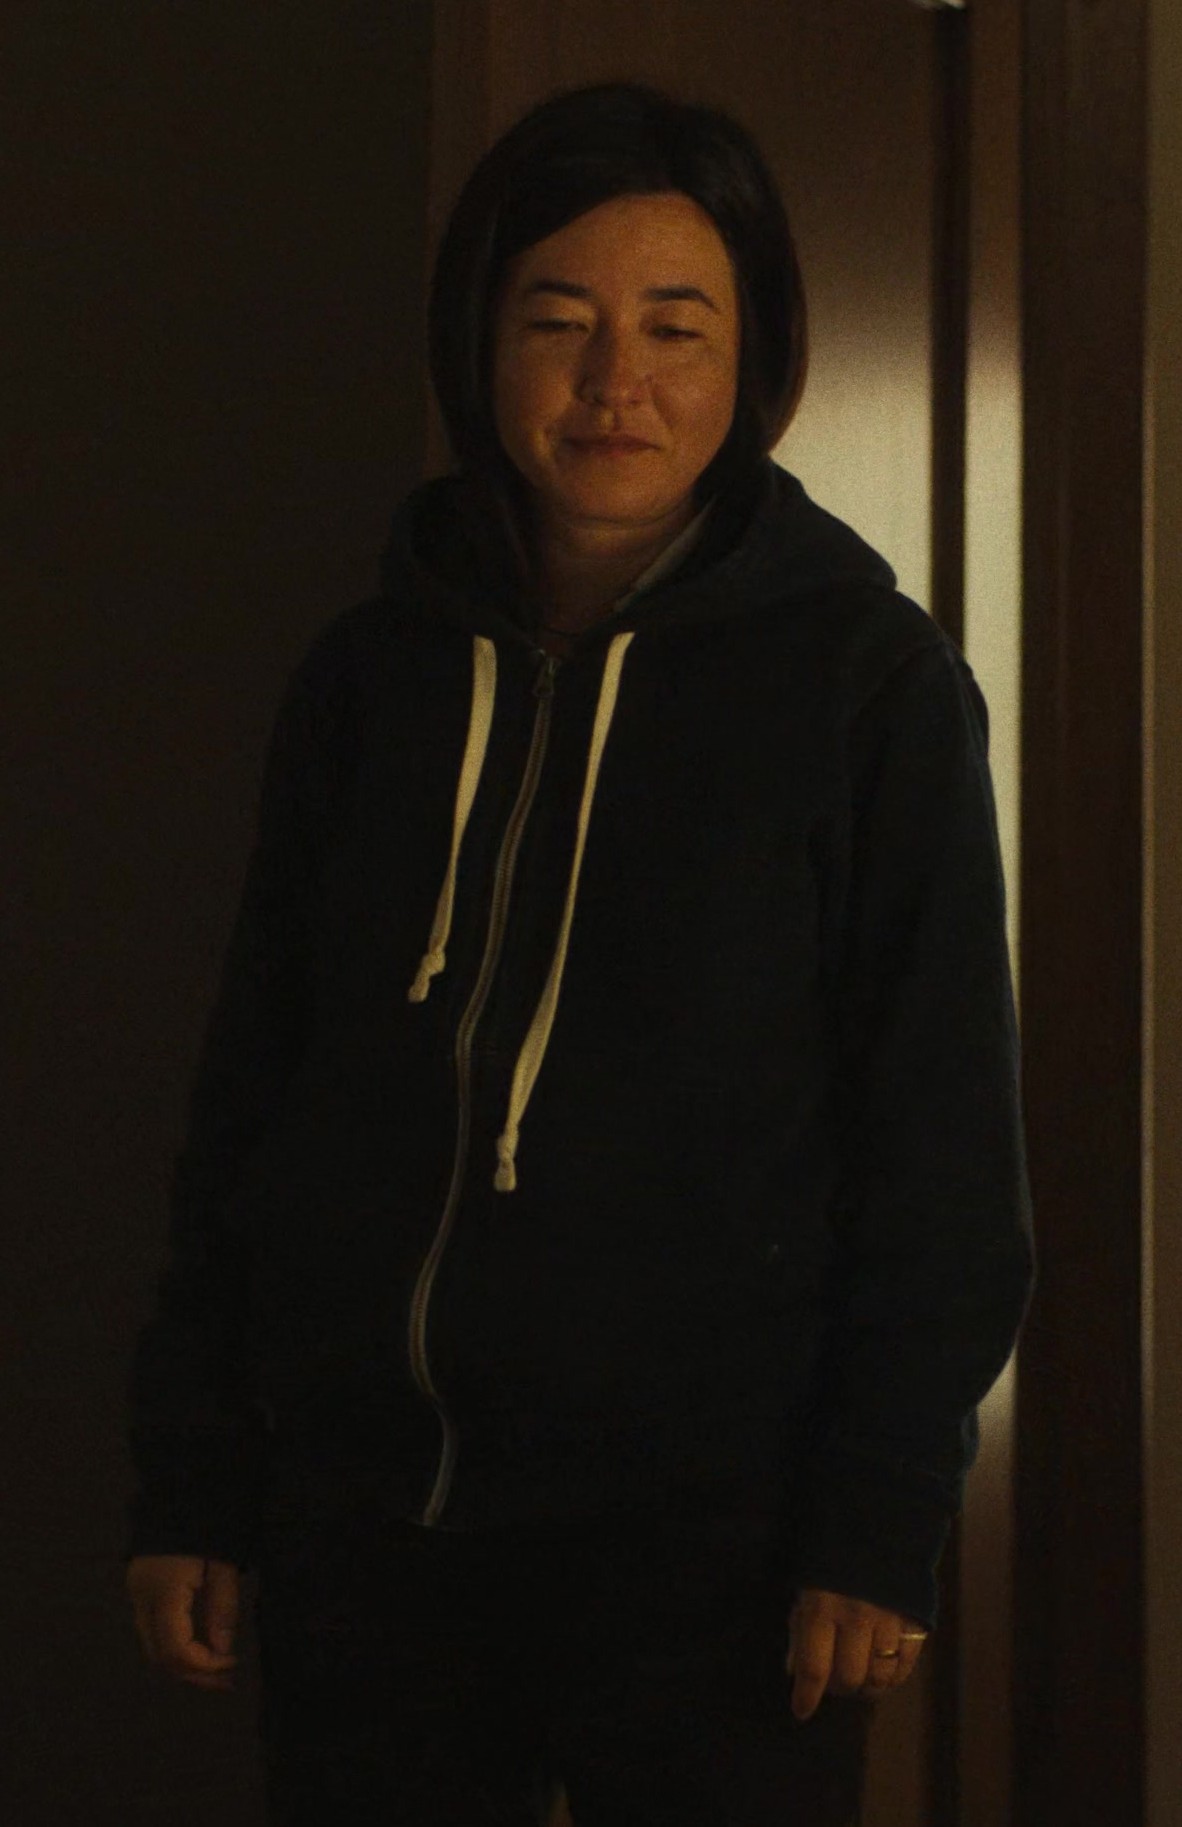 Worn on Mr. & Mrs. Smith TV Show - Classic Zip-Up Cotton Hoodie with Drawstring Hood Worn by Maya Erskine as Jane Smith